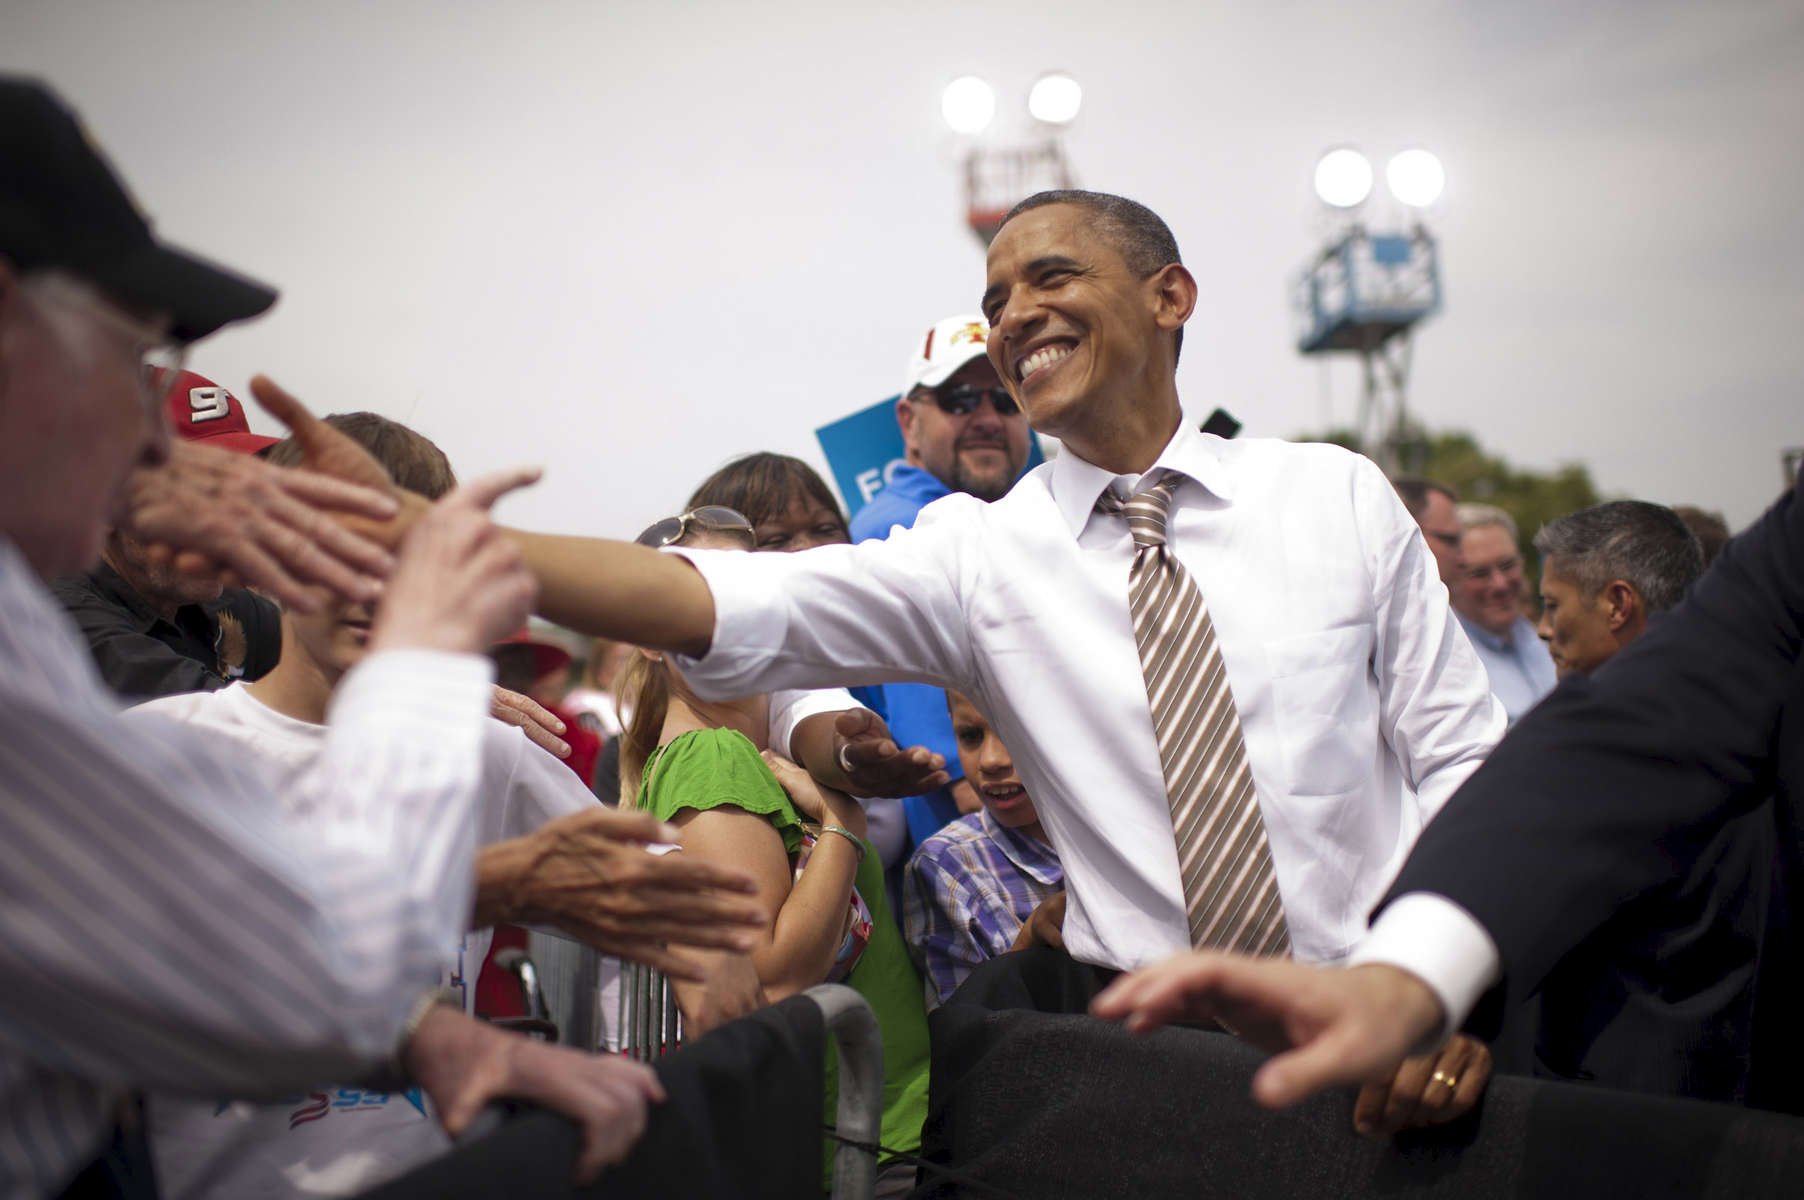 September 1st, 2012 - Urbandale, IA: President Barack Obama shakes hands after a campaign event at the Living History Farms in Urbandale, IA.  (Scout Tufankjian for Obama for America/Polaris)